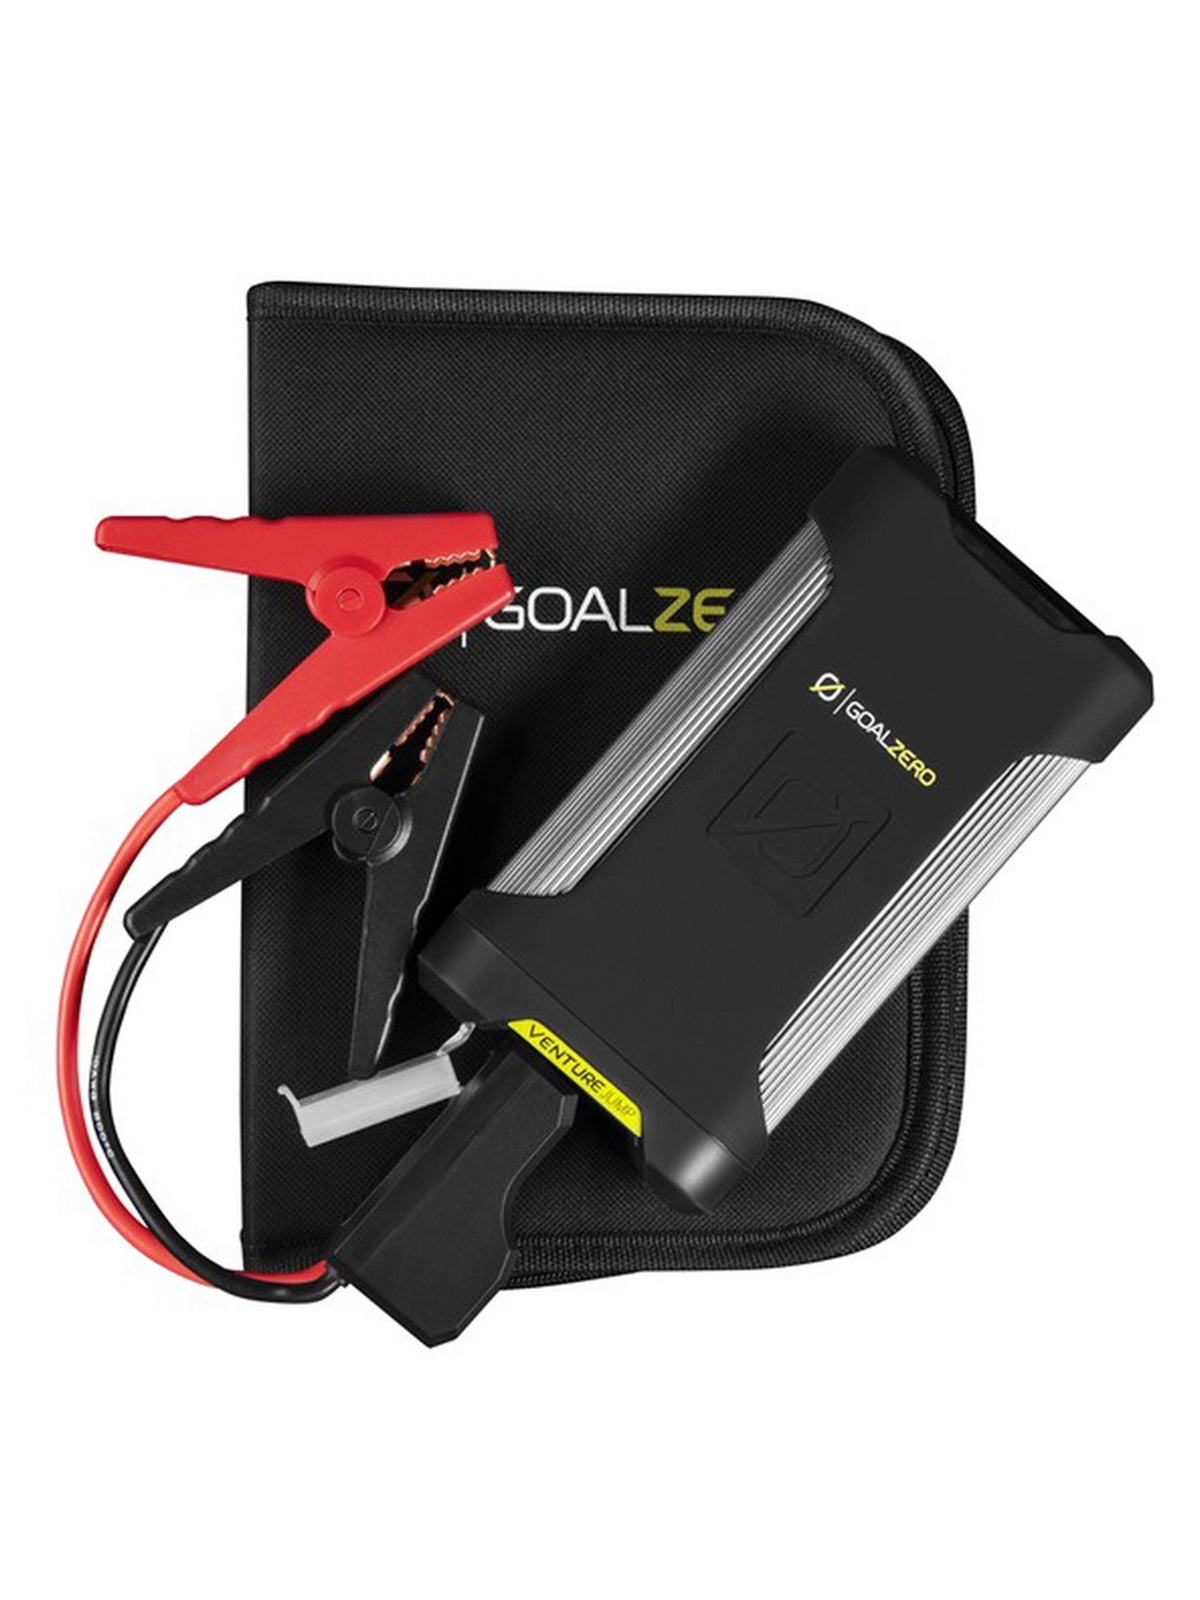 Goal Zero Venture Jump Power Bank with leads connected